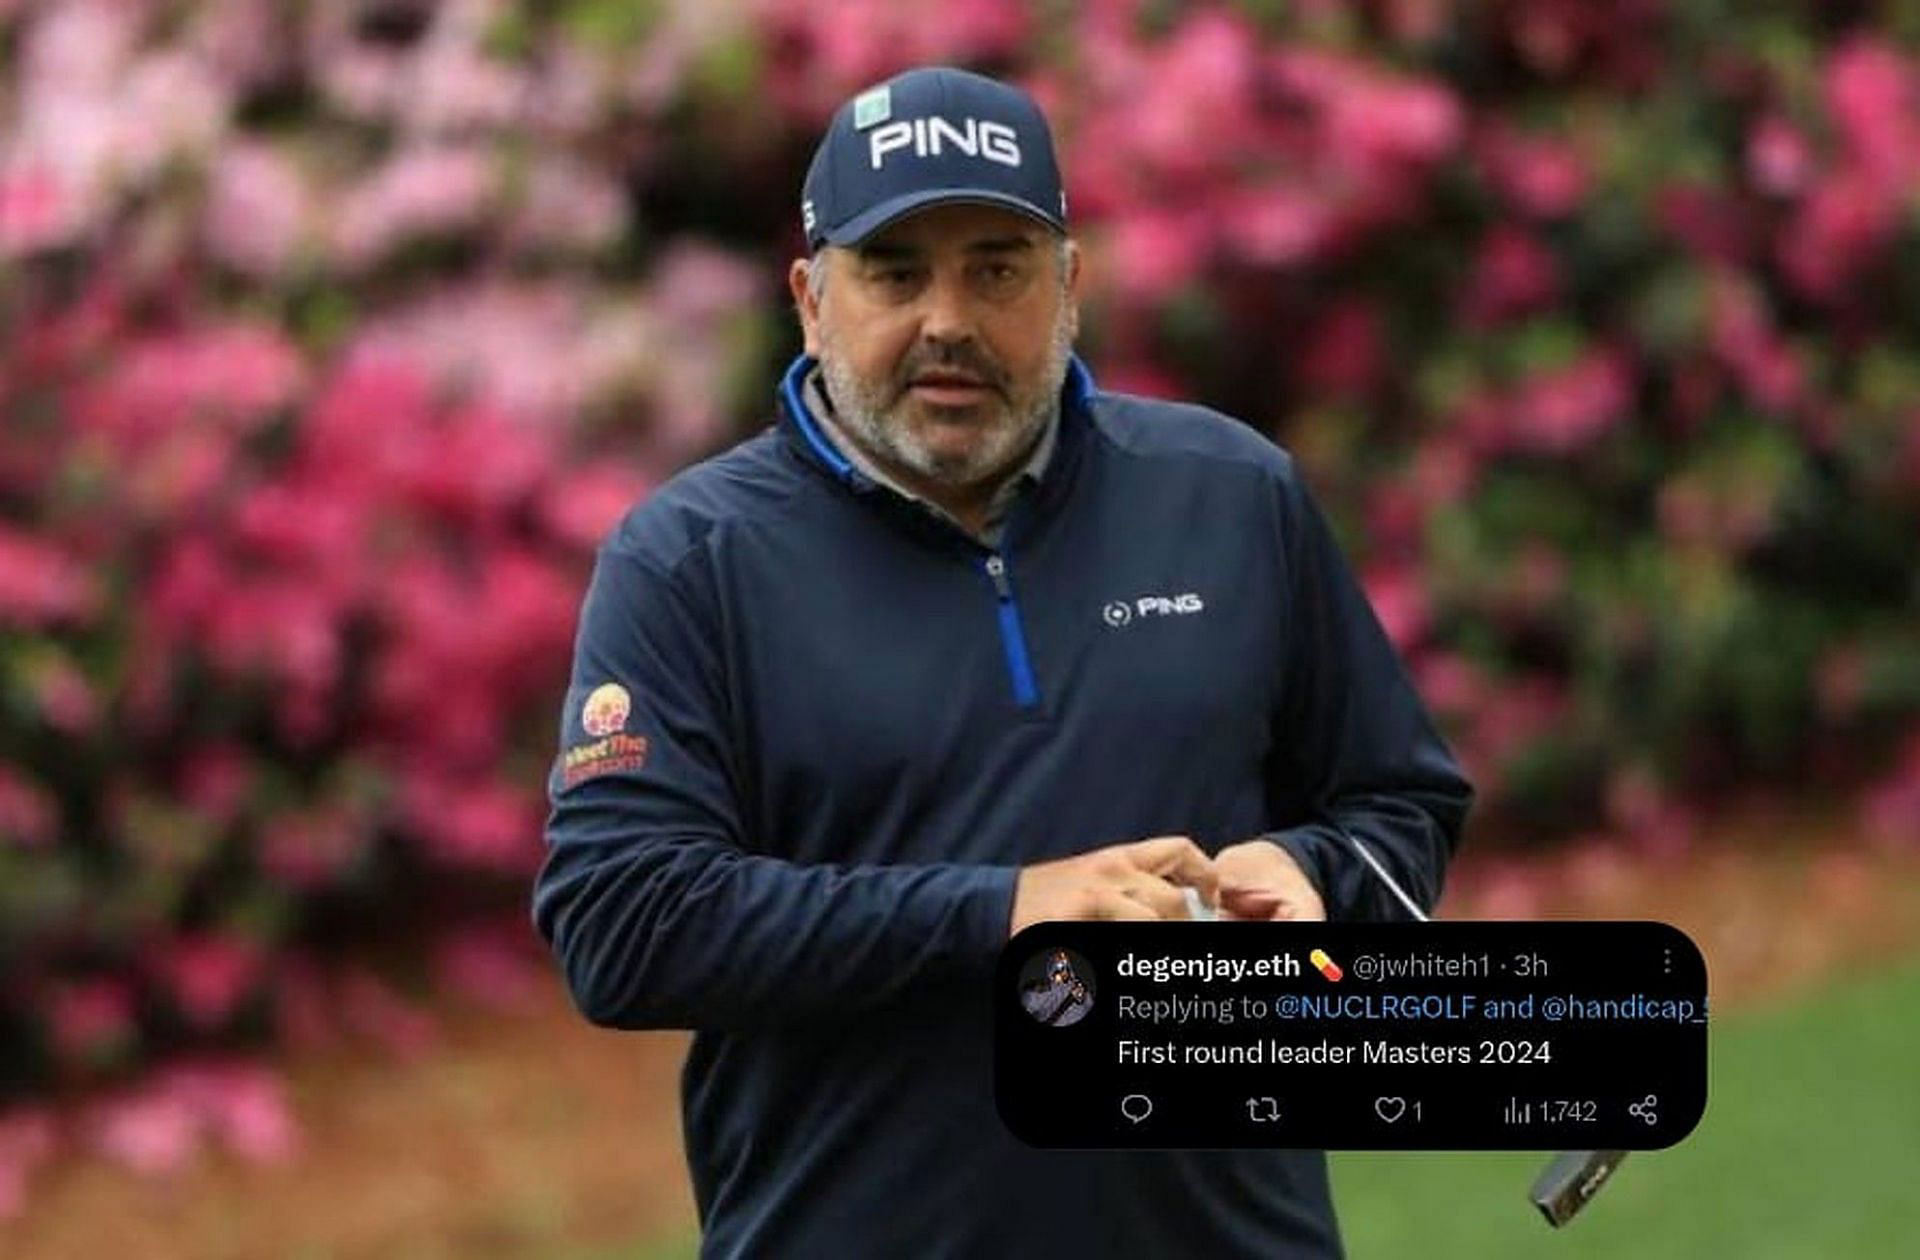 "First round leader Masters 2024" Fans react to Angel Cabrera's